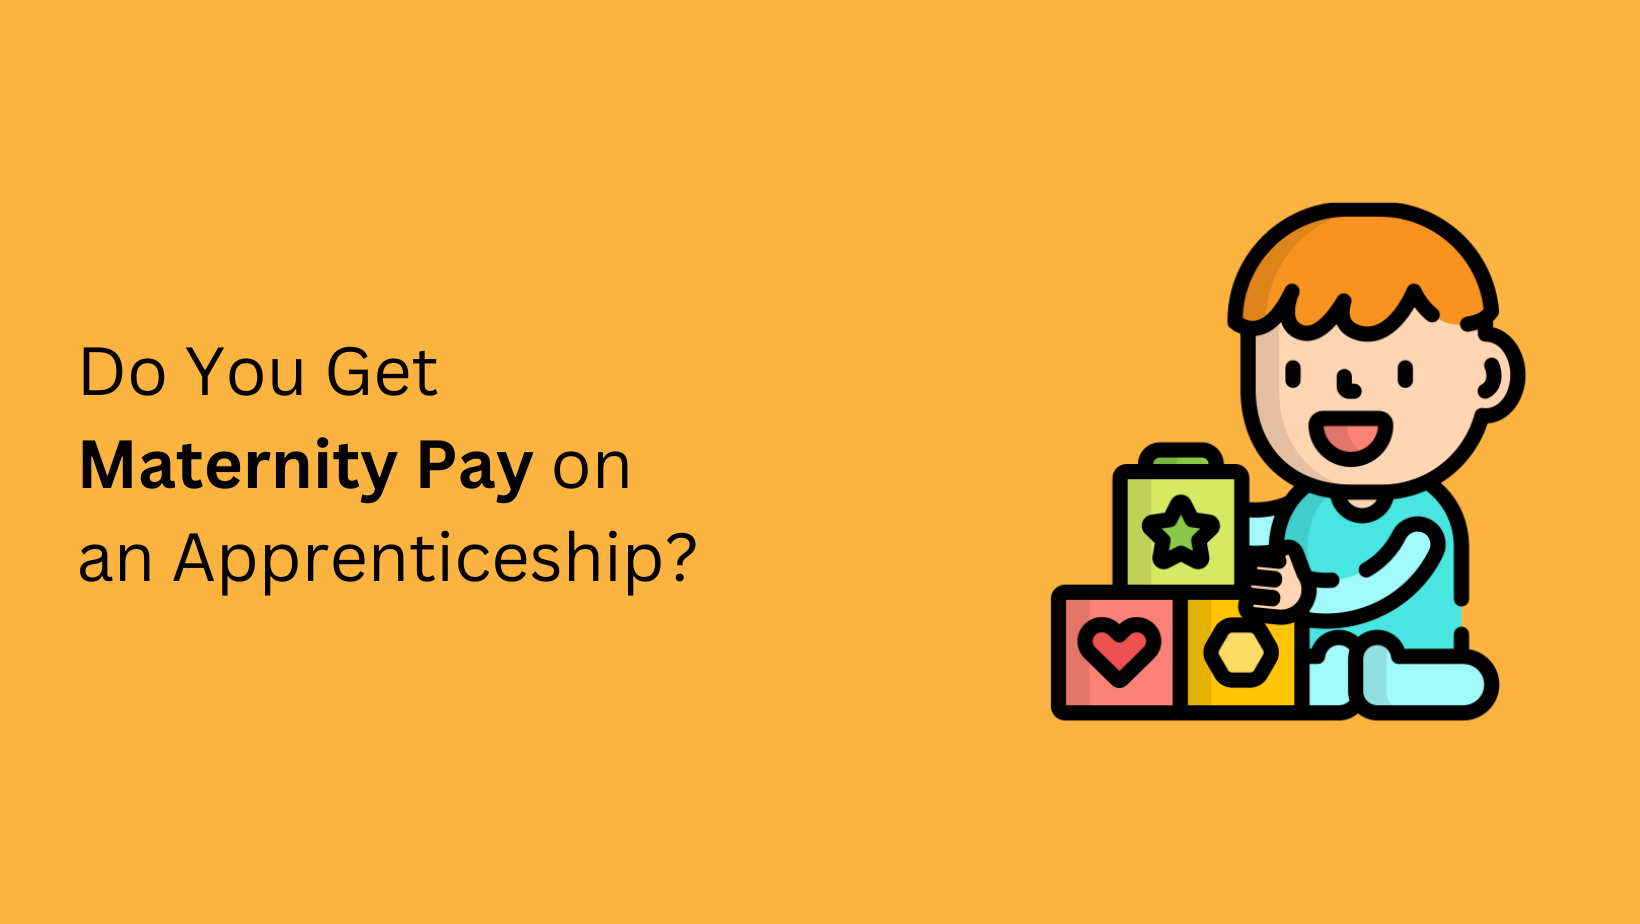 Do You Get Maternity Pay on an Apprenticeship